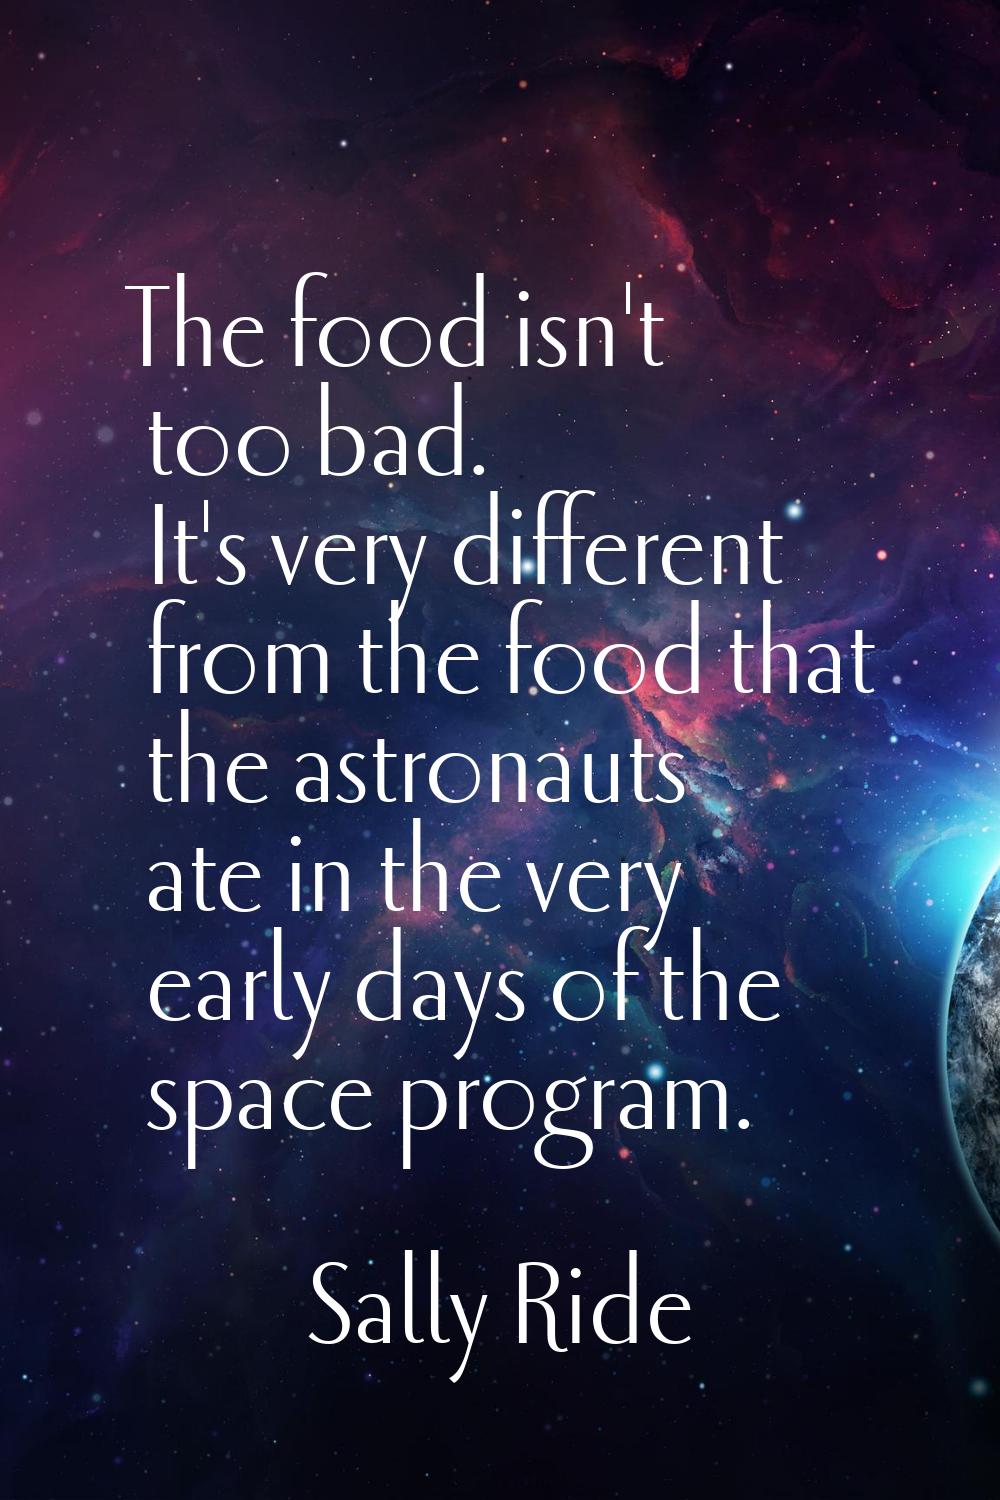 The food isn't too bad. It's very different from the food that the astronauts ate in the very early